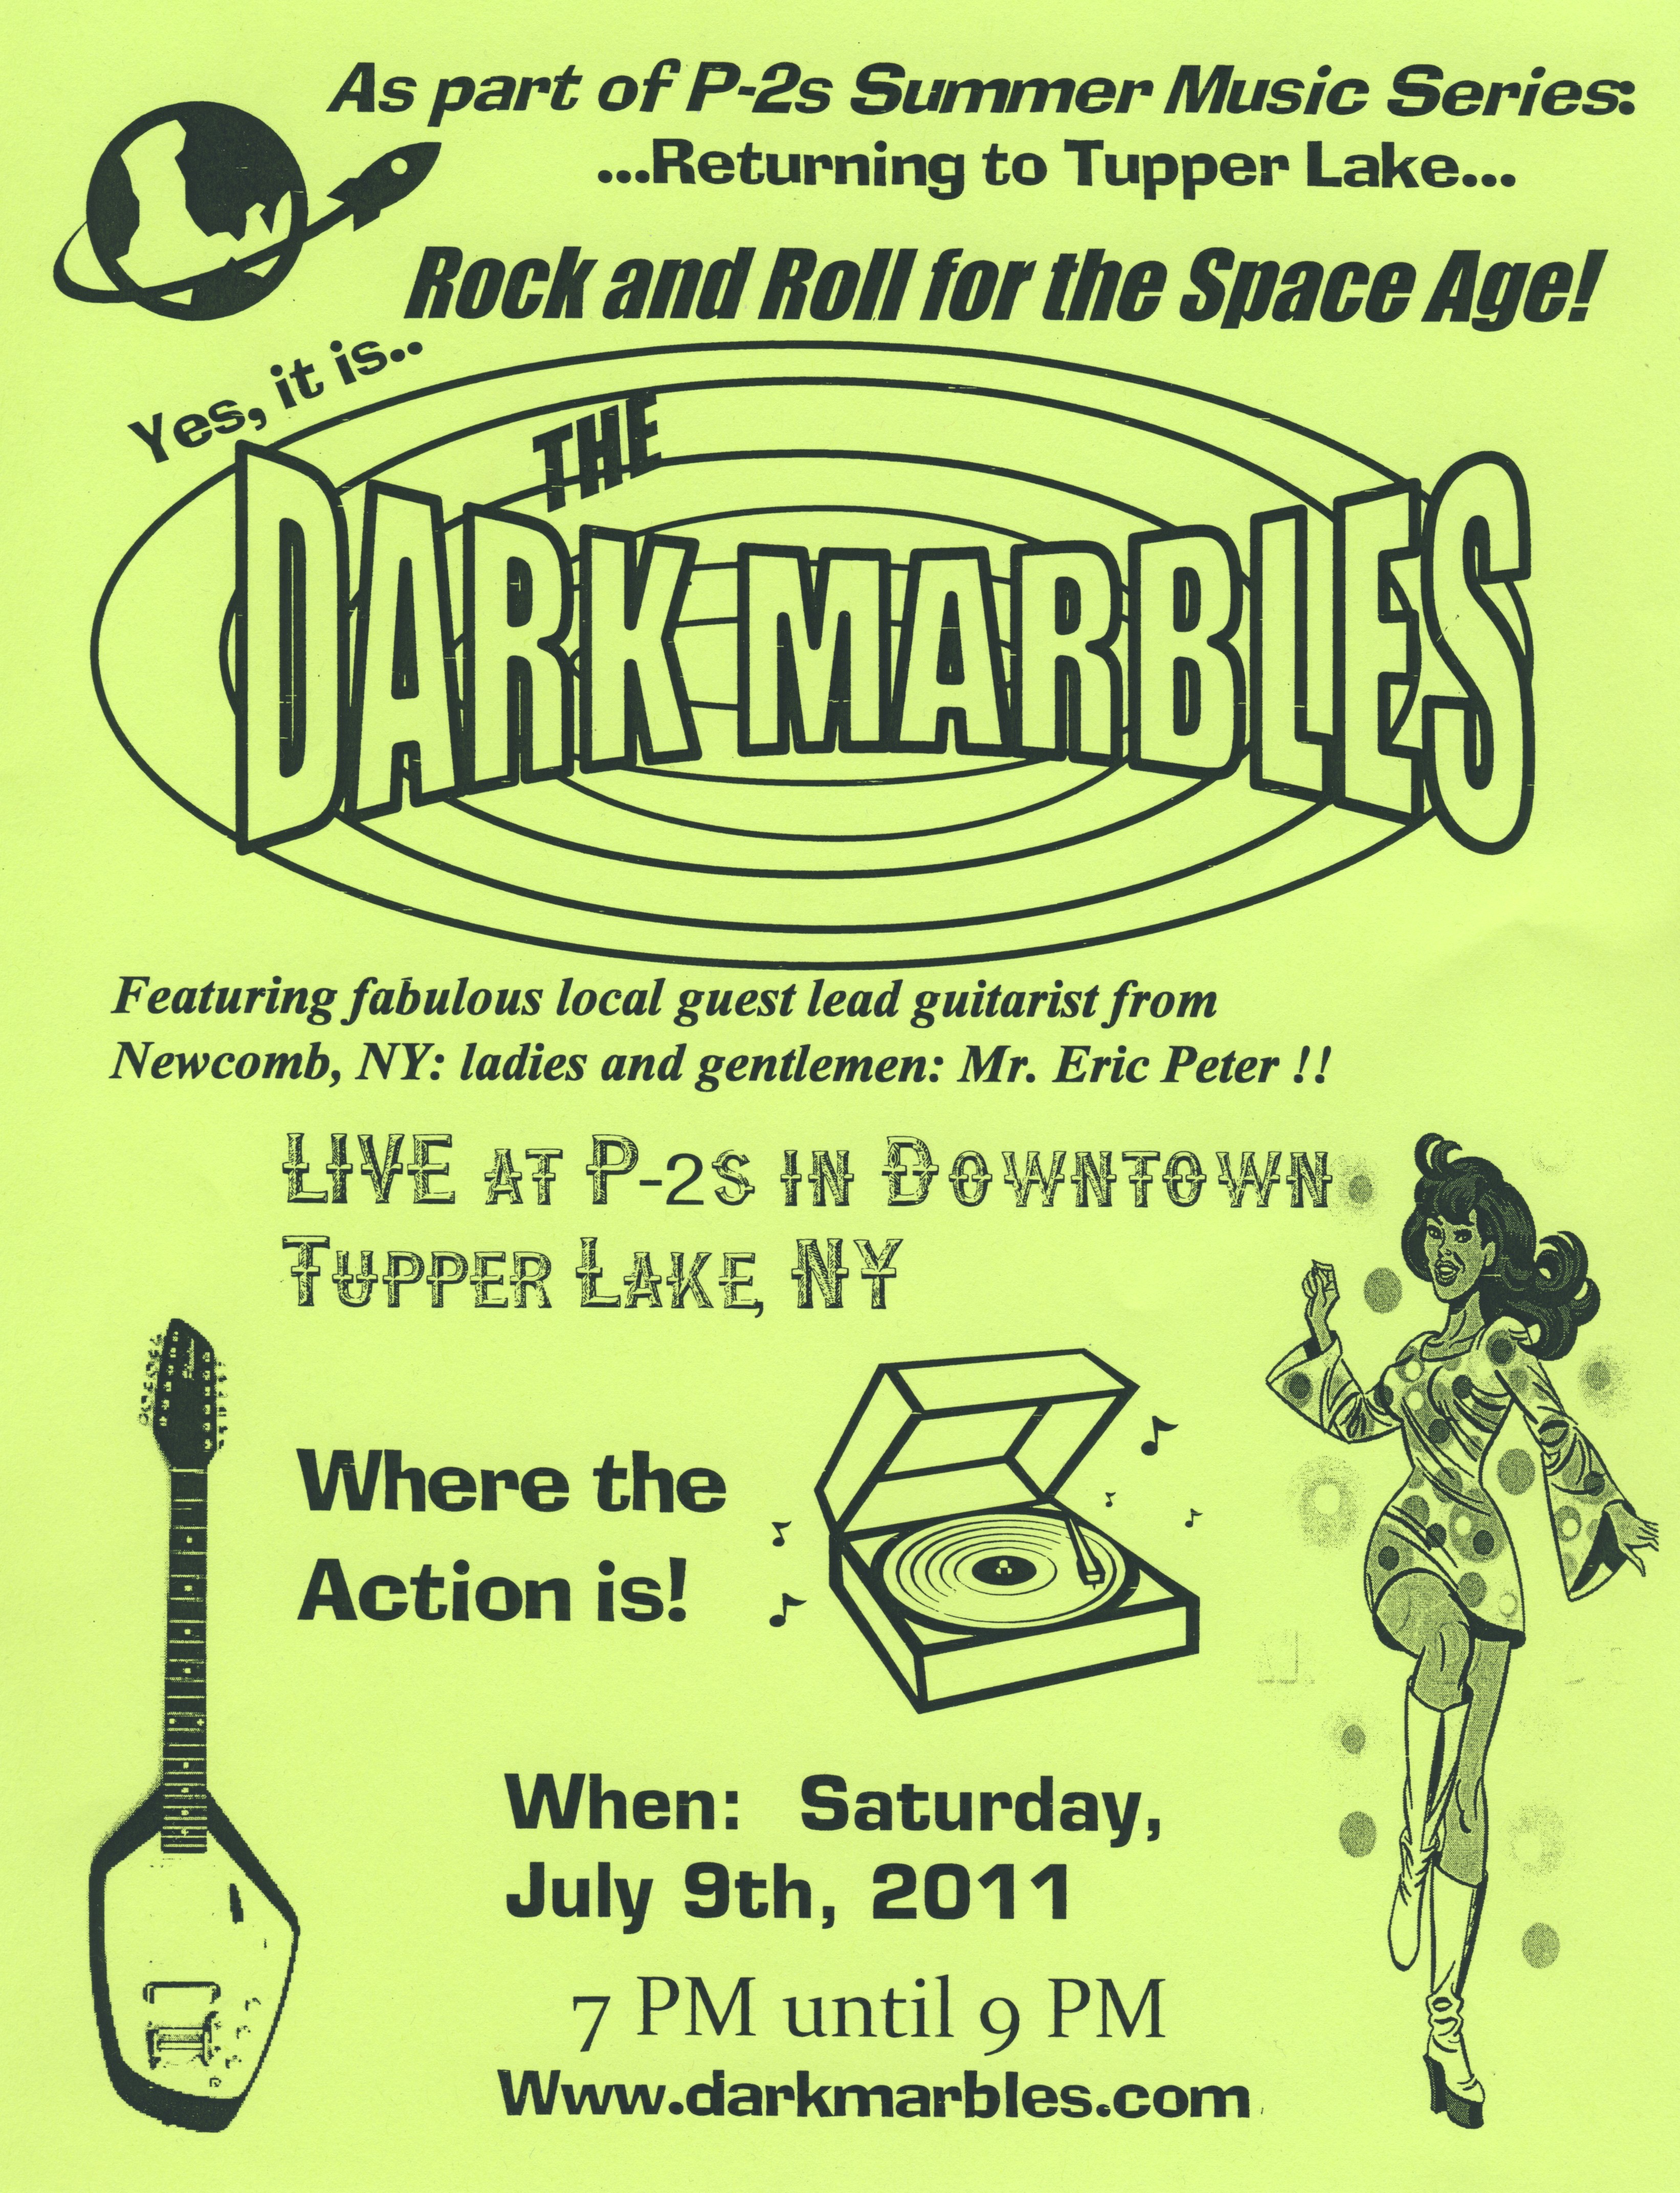 The Dark Marbles Rock N Roll for the Space Age